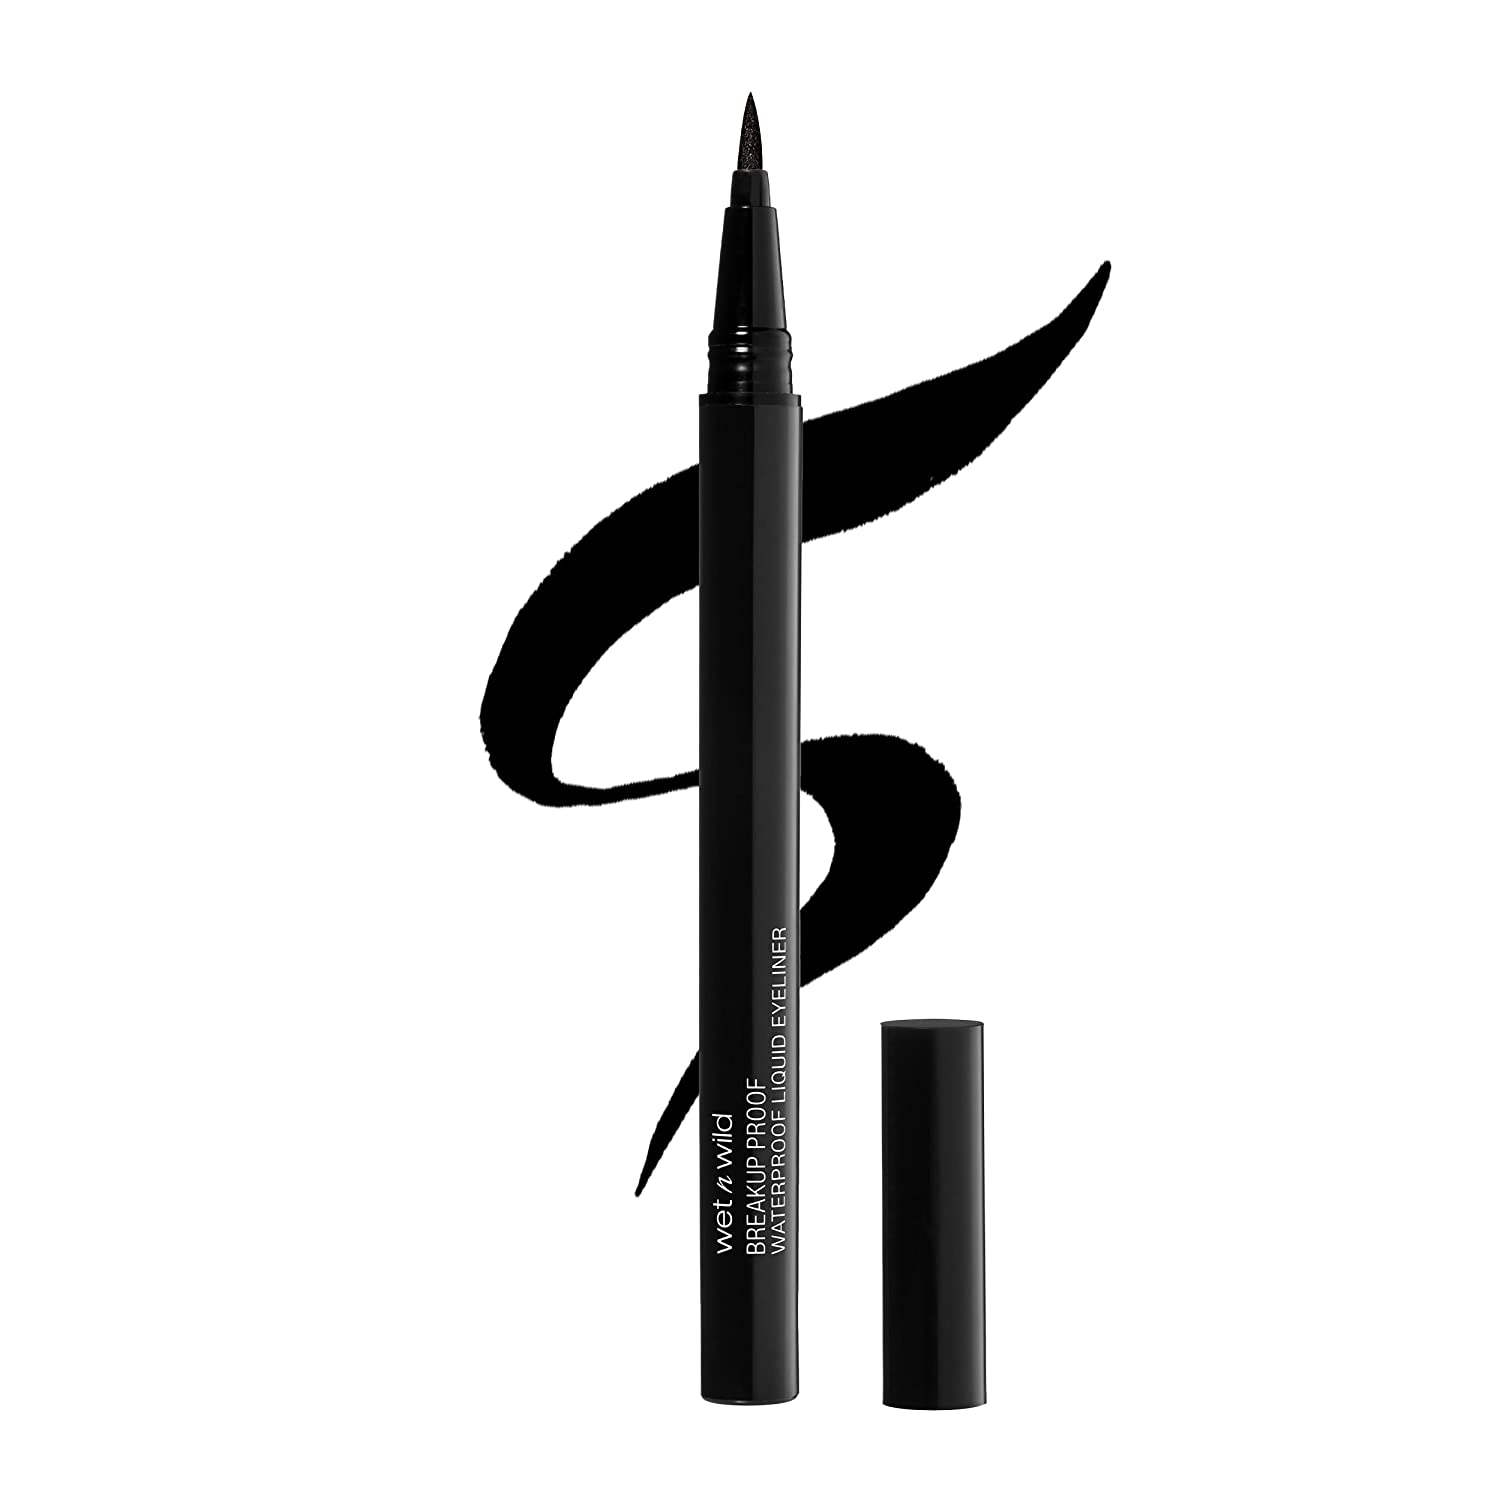 Wet n Wild Cry-Proof Anti-Fading Eyeliner